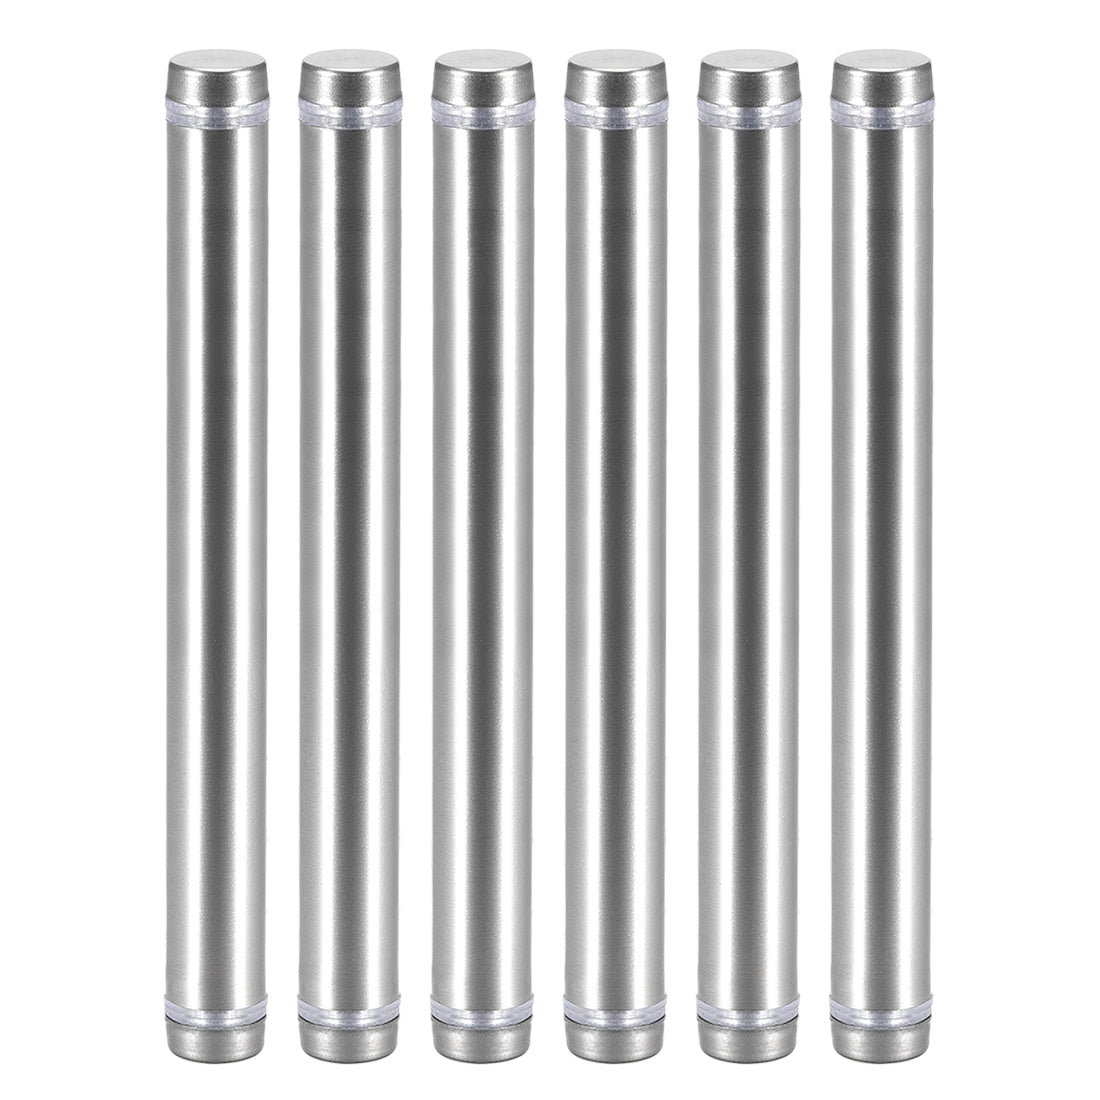 uxcell Uxcell Glass Standoff Double Head Stainless Steel Standoff Holder 12mm x 124mm 6 Pcs